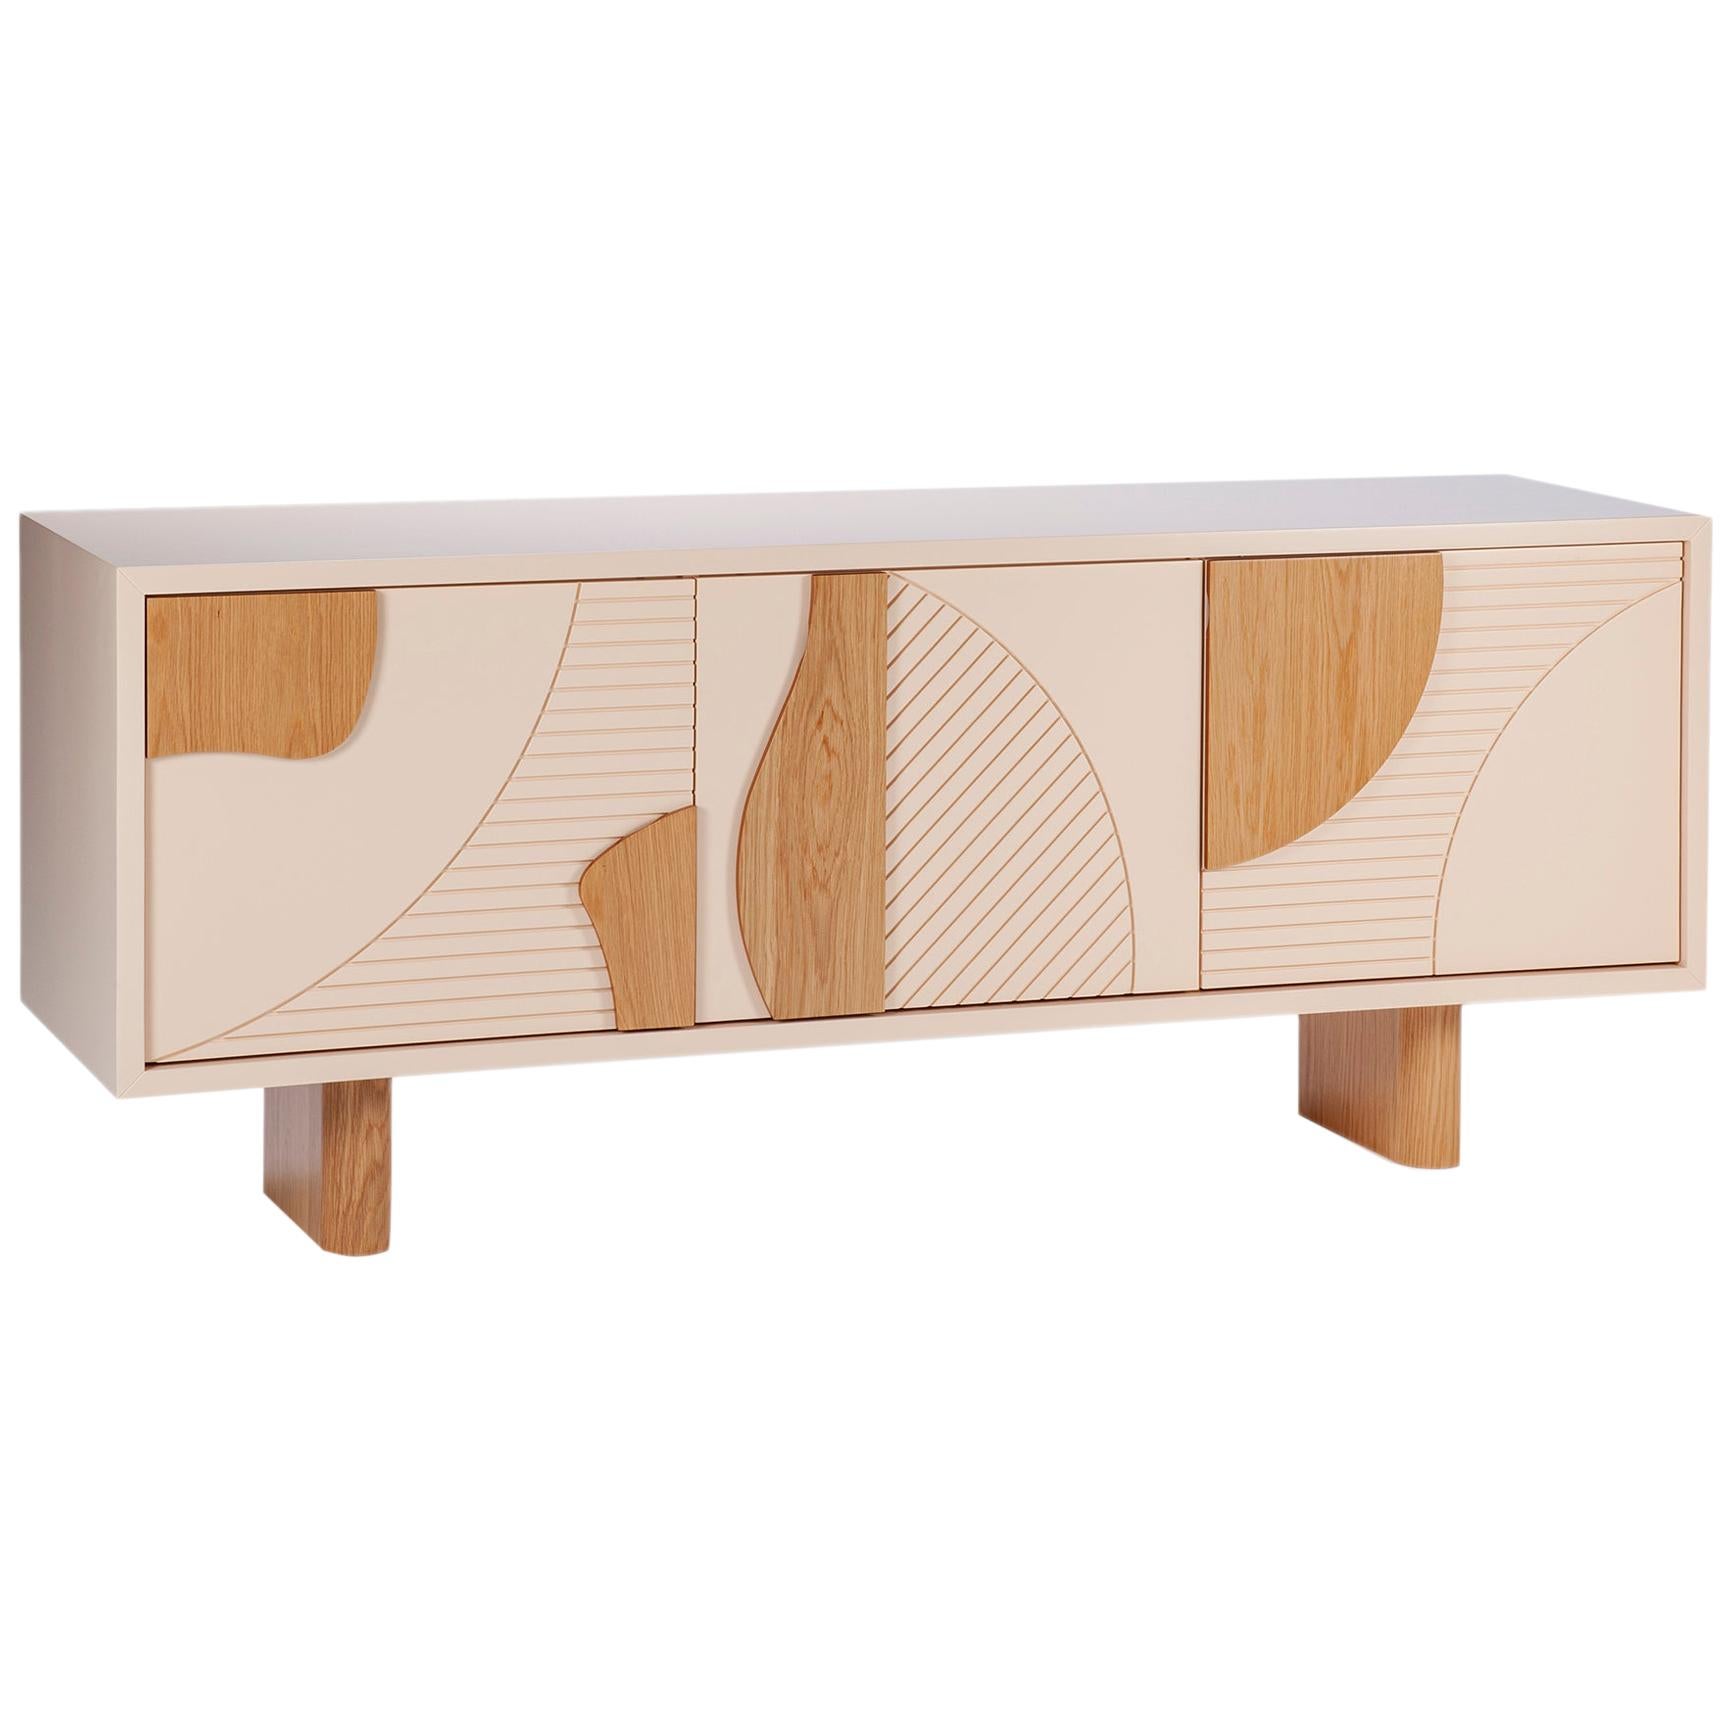 Contemporary Modern Sideboard Olga with Textured Doors in Oak Wood and Beige For Sale